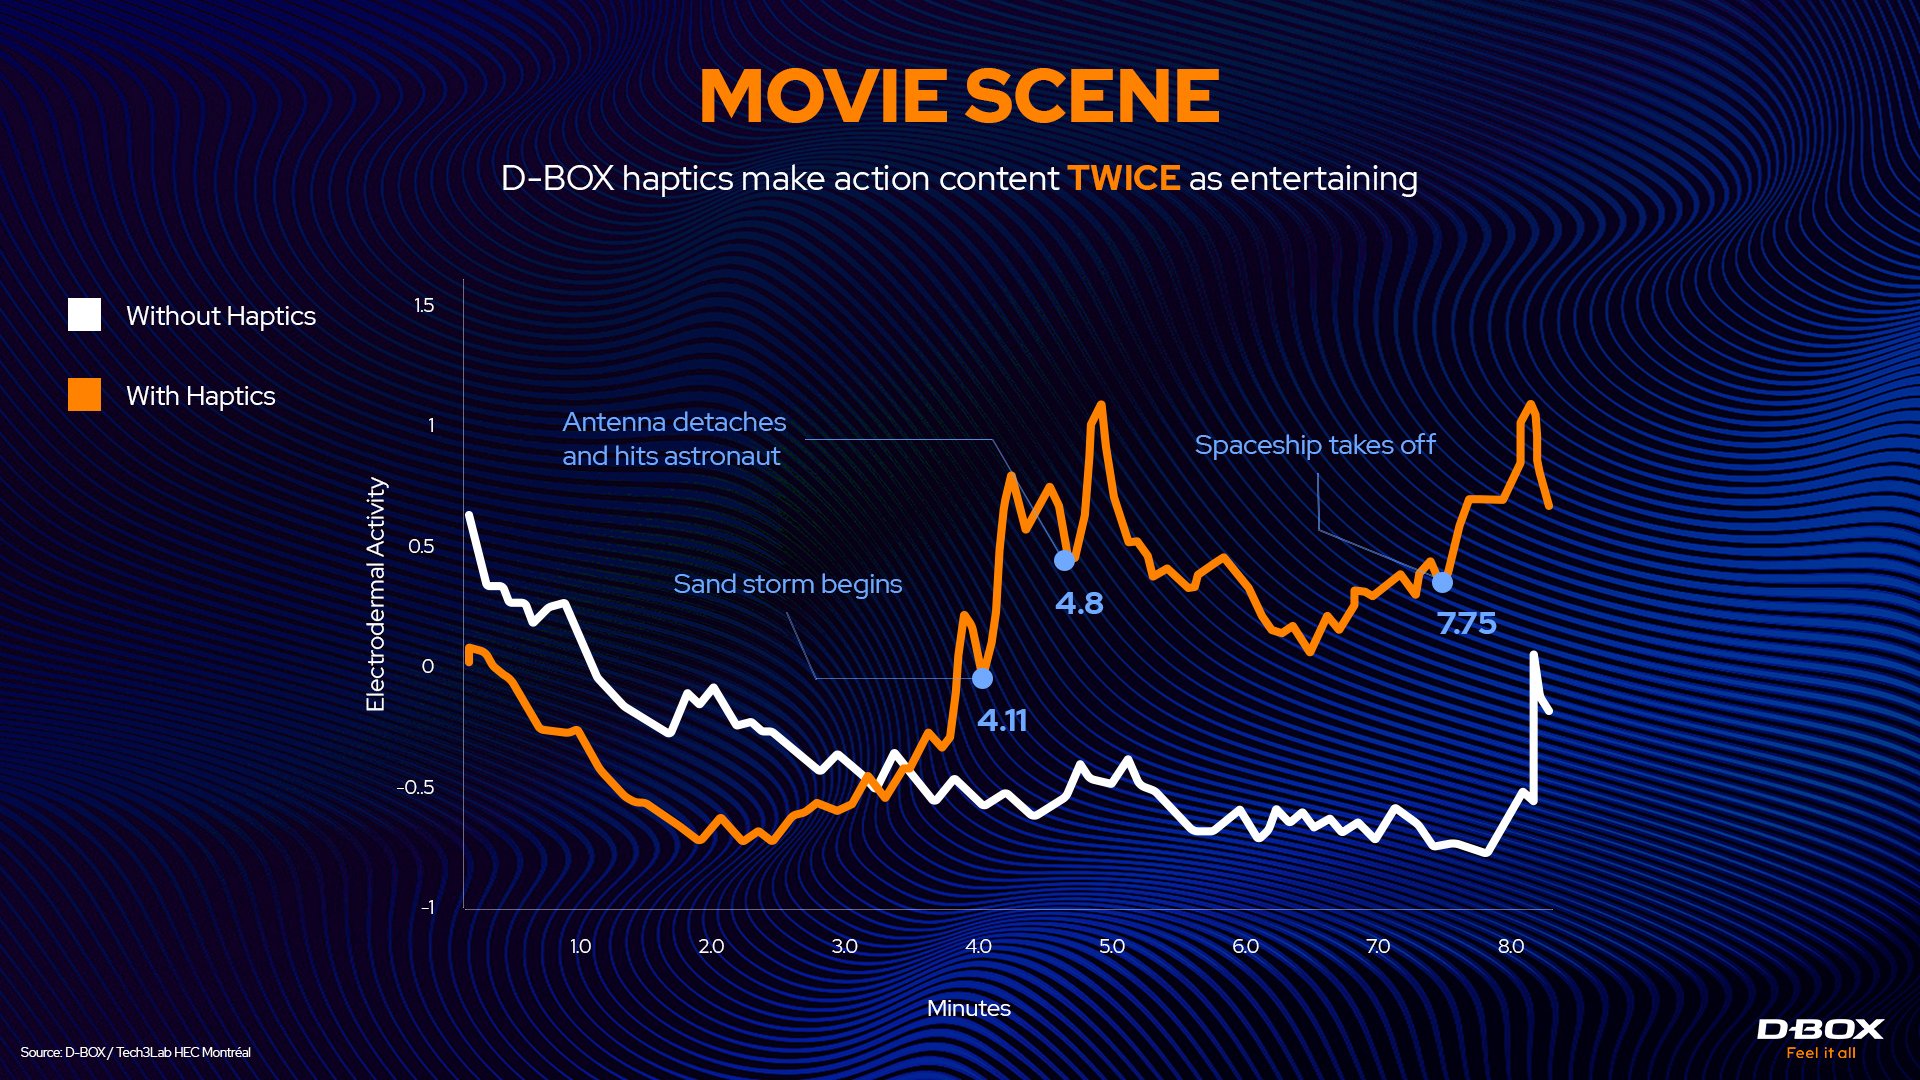 A graph depicting the power of D-BOX in action movies.